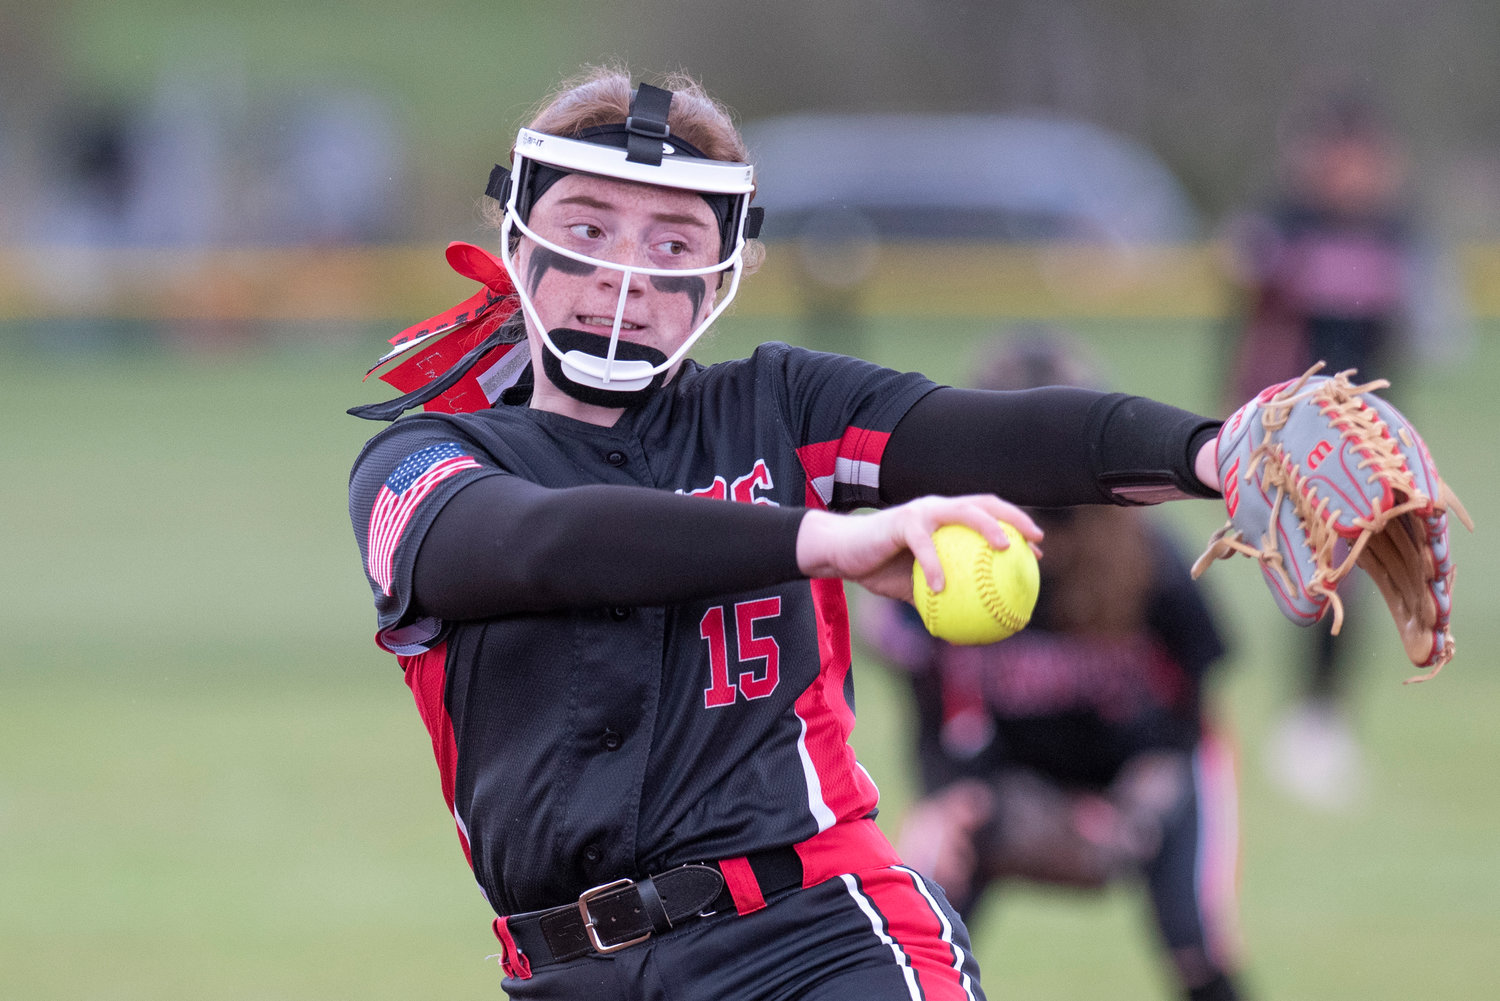 Tenino pitcher Emily Baxter winds up to deliver a pitch to an Elma batter during a league home game on April 26.